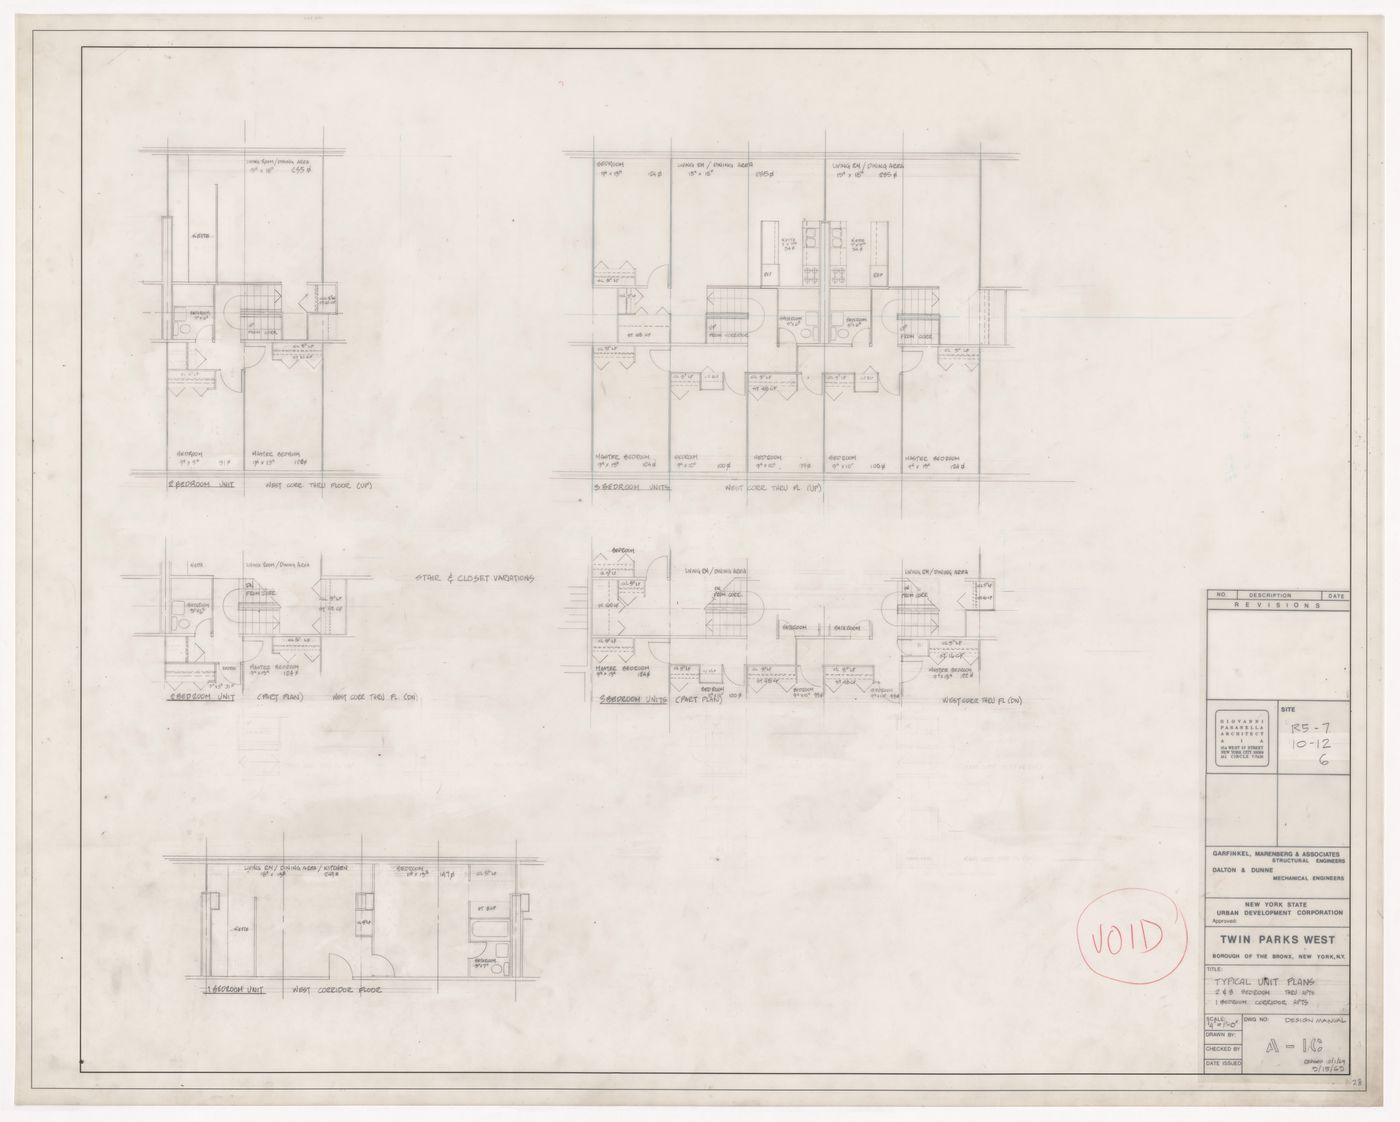 Typical unit plans for Twin Parks West, Sites R5-7, 10-12, 6, Bronx, New York